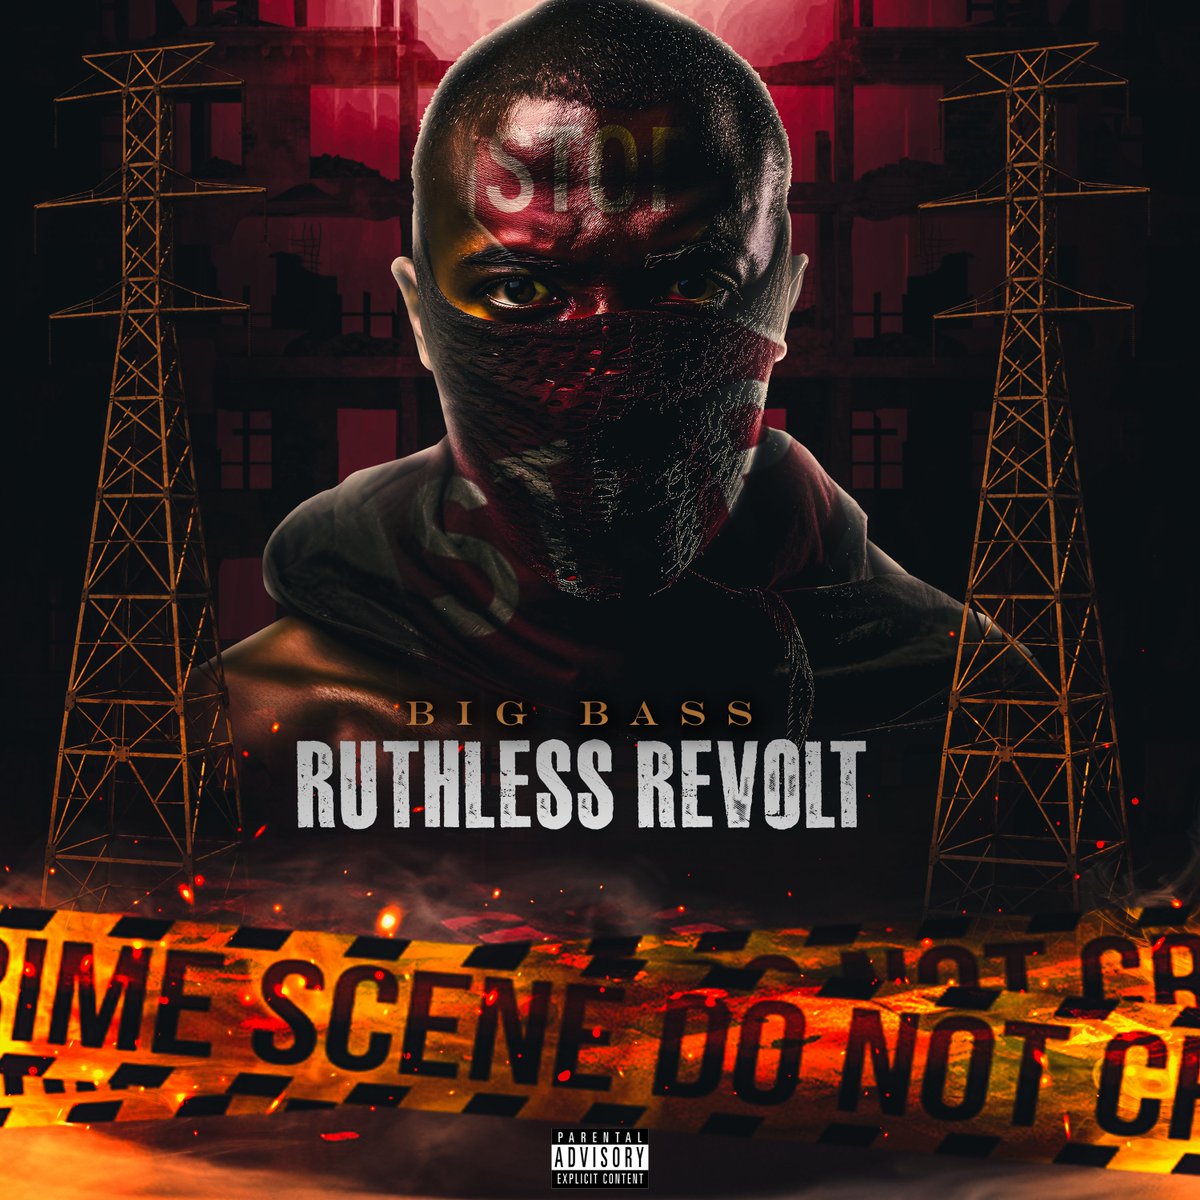 '' RUTHLESS REVOLT '' COVER CONCEPT ✔🎨.

DM FOR CUSTOM COVER👑

#graphickmind #coverart #rapmusic #music #rapper #trap #artist #hiphop #worldstarhiphop #rappers #trapmusic #unsignedrapper #unsignedartist #unsignedhype #realhiphopmusic #hiphopunderground #boombaphiphop